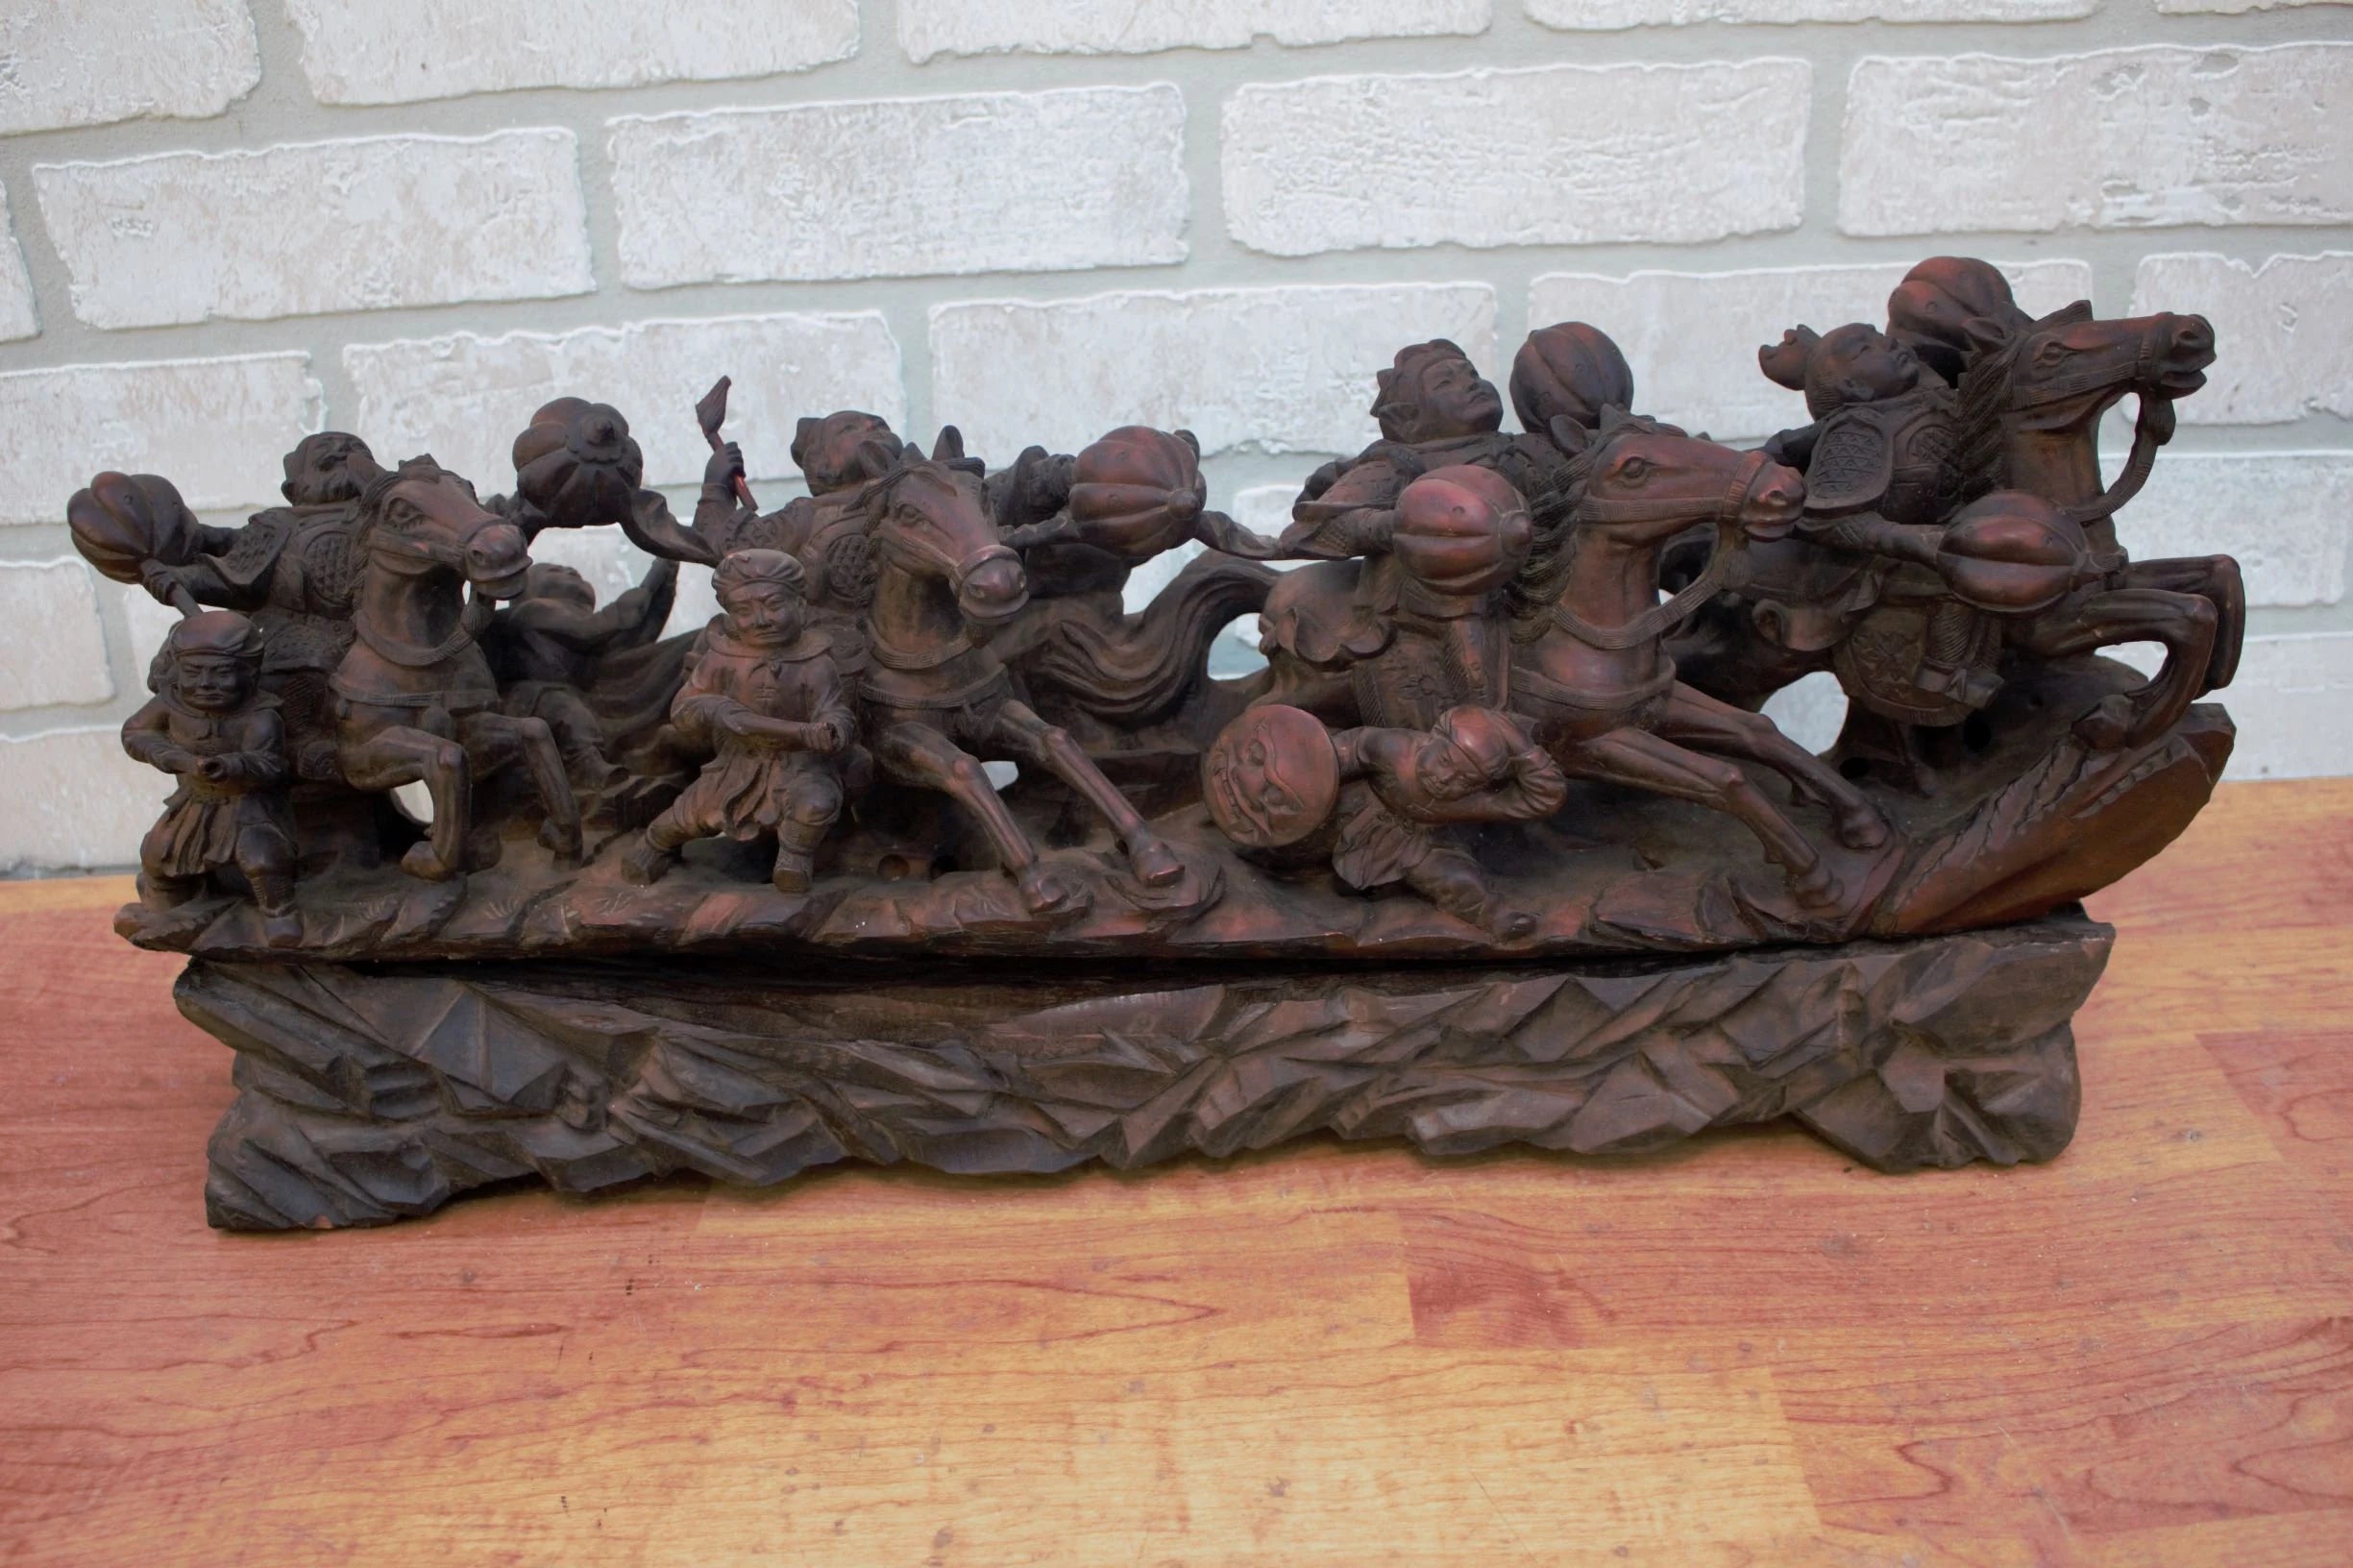 Carved Statue of Asian Warriors on Wood Base - 2 pieces